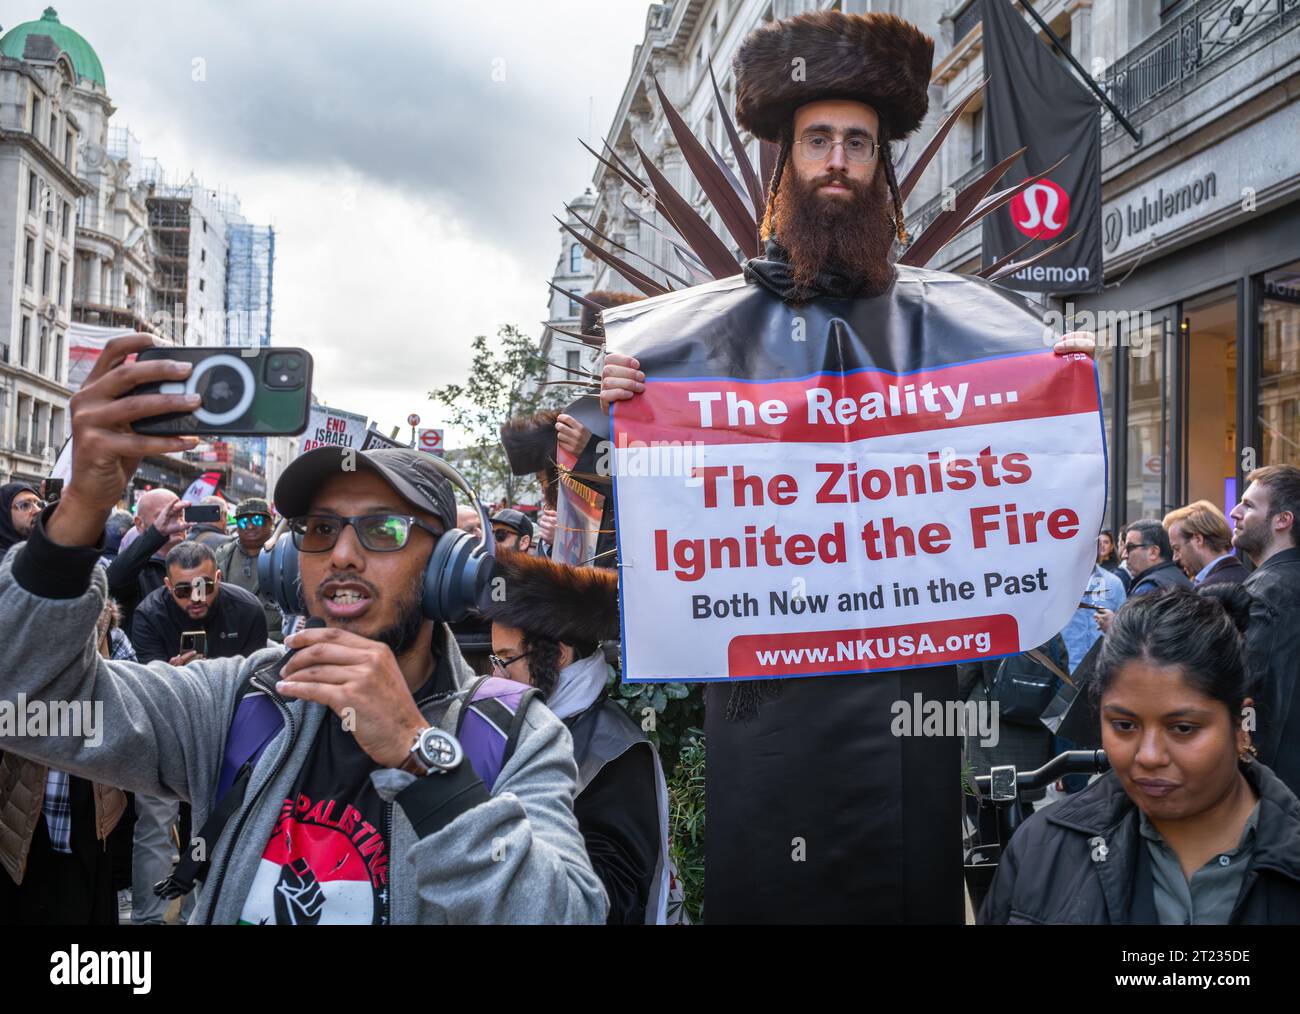 London, UK. 14 Oct 2023: A muslim man stops to take a selfie with a man from the anti-Zionist Haredi Jewish group Neturei Karta, or Guardians of the C Stock Photo